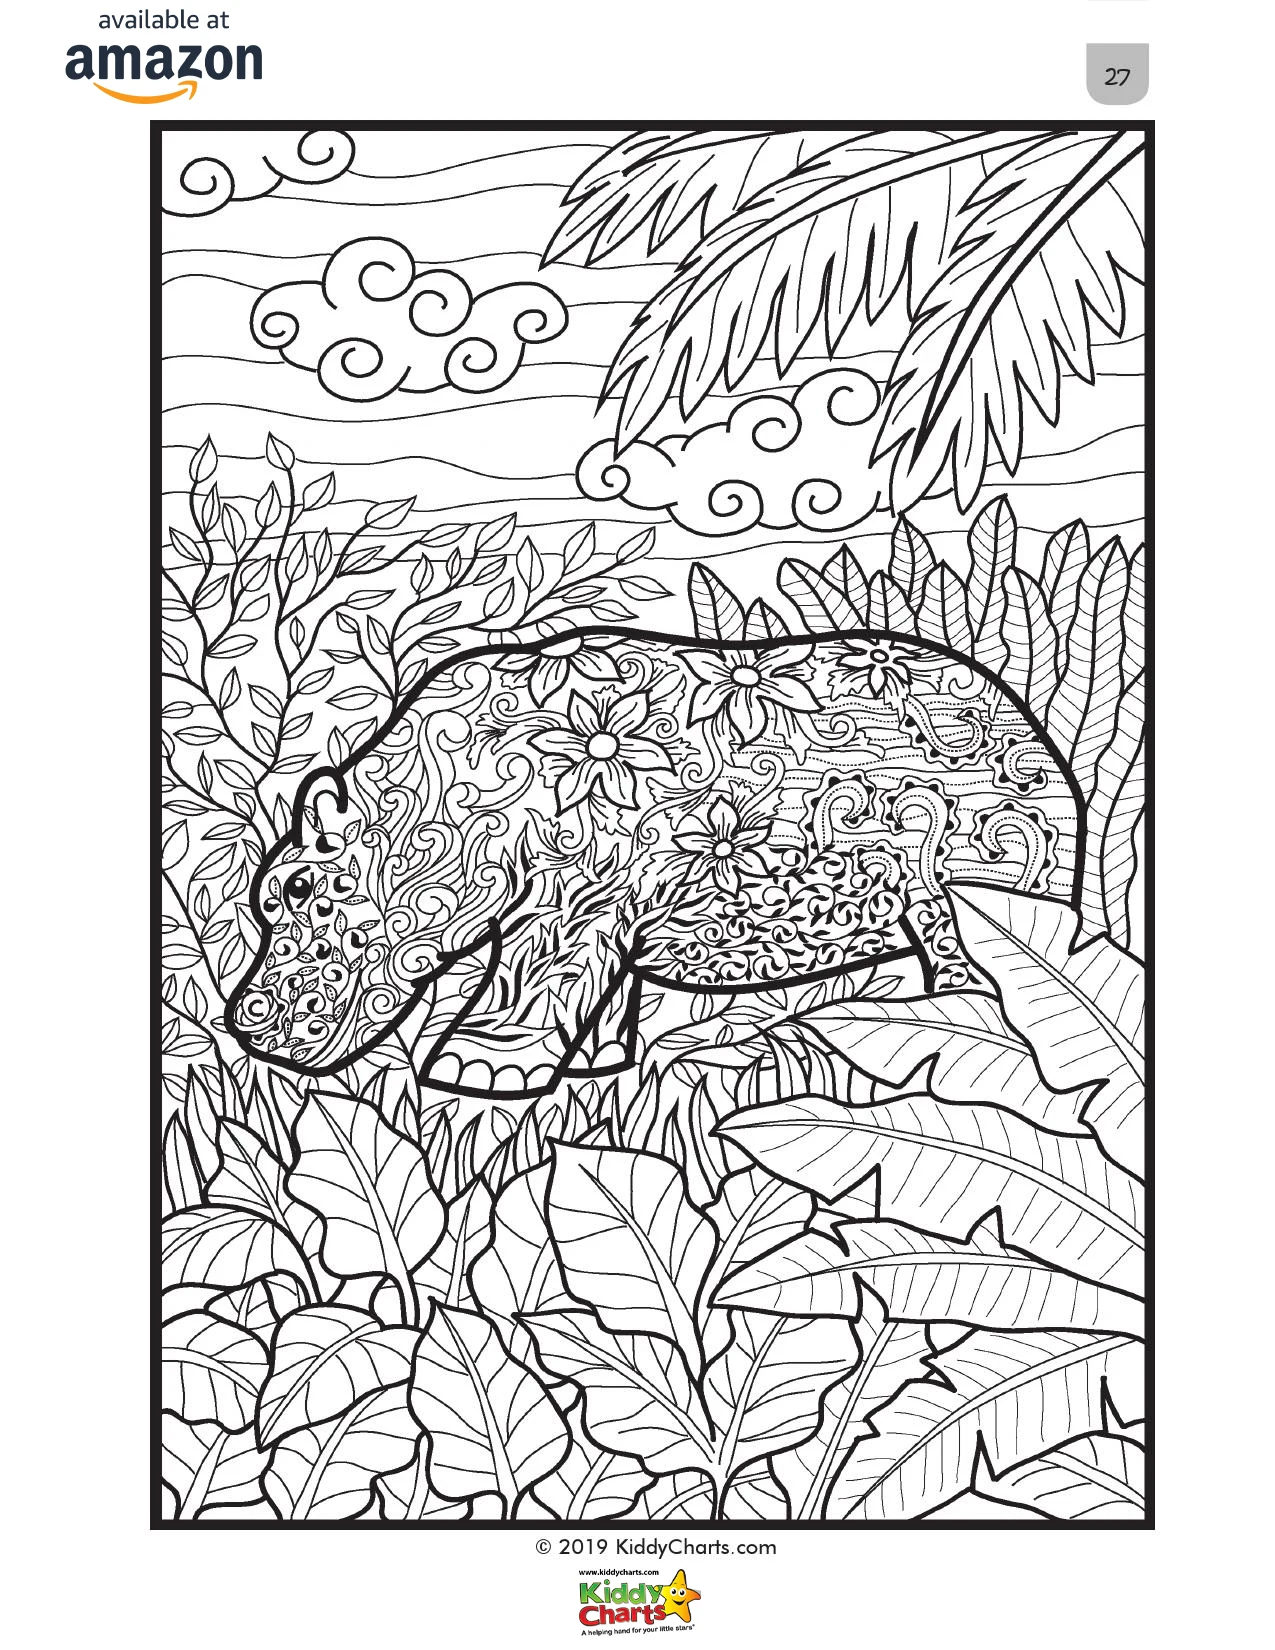 Our Hippo mindful coloring page for adults, part of our mindful coloring book. Get this for free and check out the rest! #coloring #colouring #animals #kids #adultcoloring #kidscoloring #hippos #nature #coloringbook #coloringbooks #freestuff